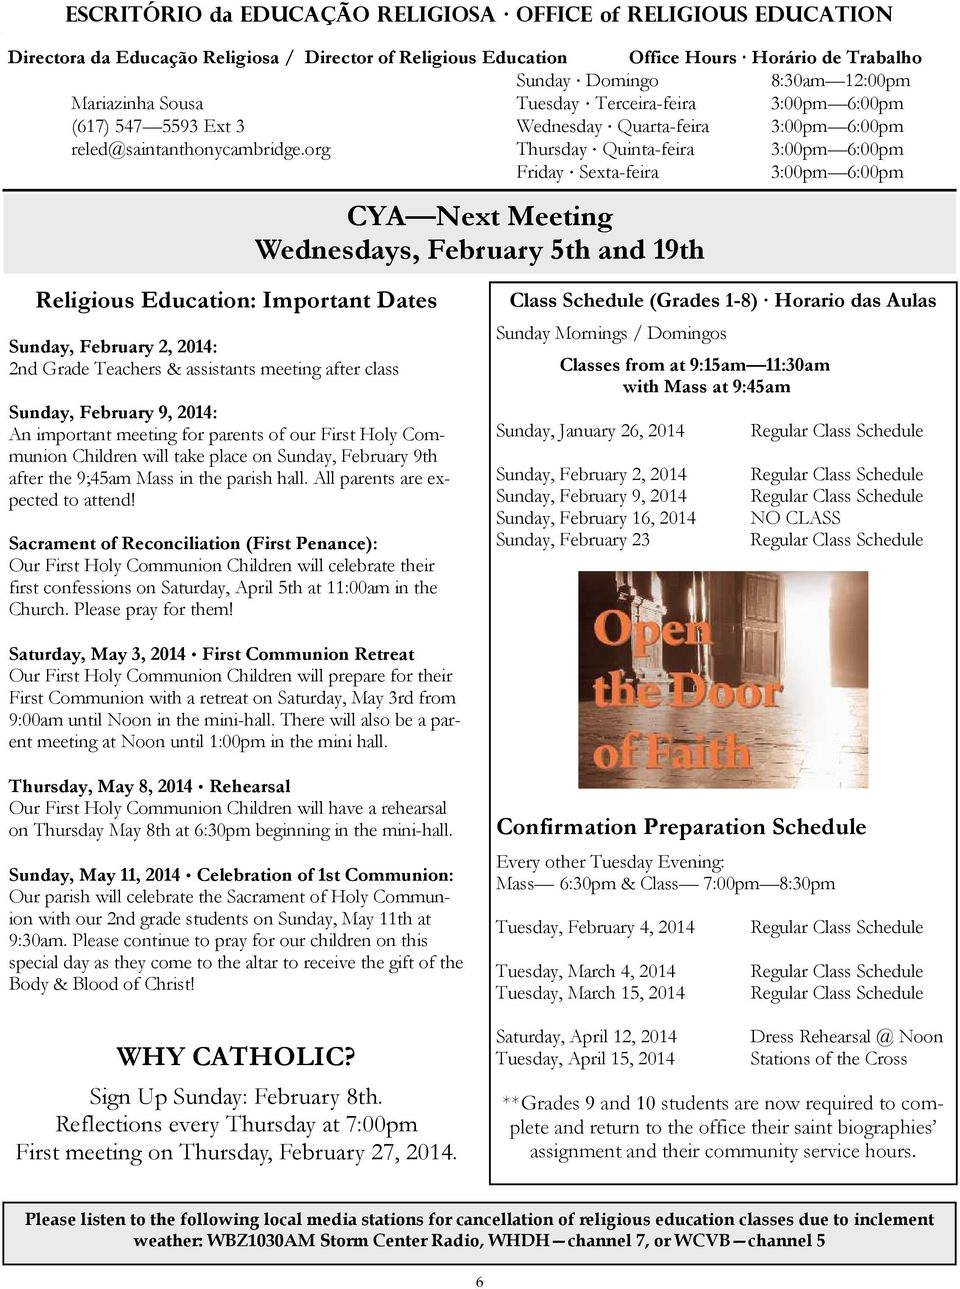 org Thursday Quinta-feira 3:00pm 6:00pm Friday Sexta-feira 3:00pm 6:00pm CYA Next Meeting Wednesdays, February 5th and 19th Religious Education: Important Dates Sunday, February 2, 2014: 2nd Grade